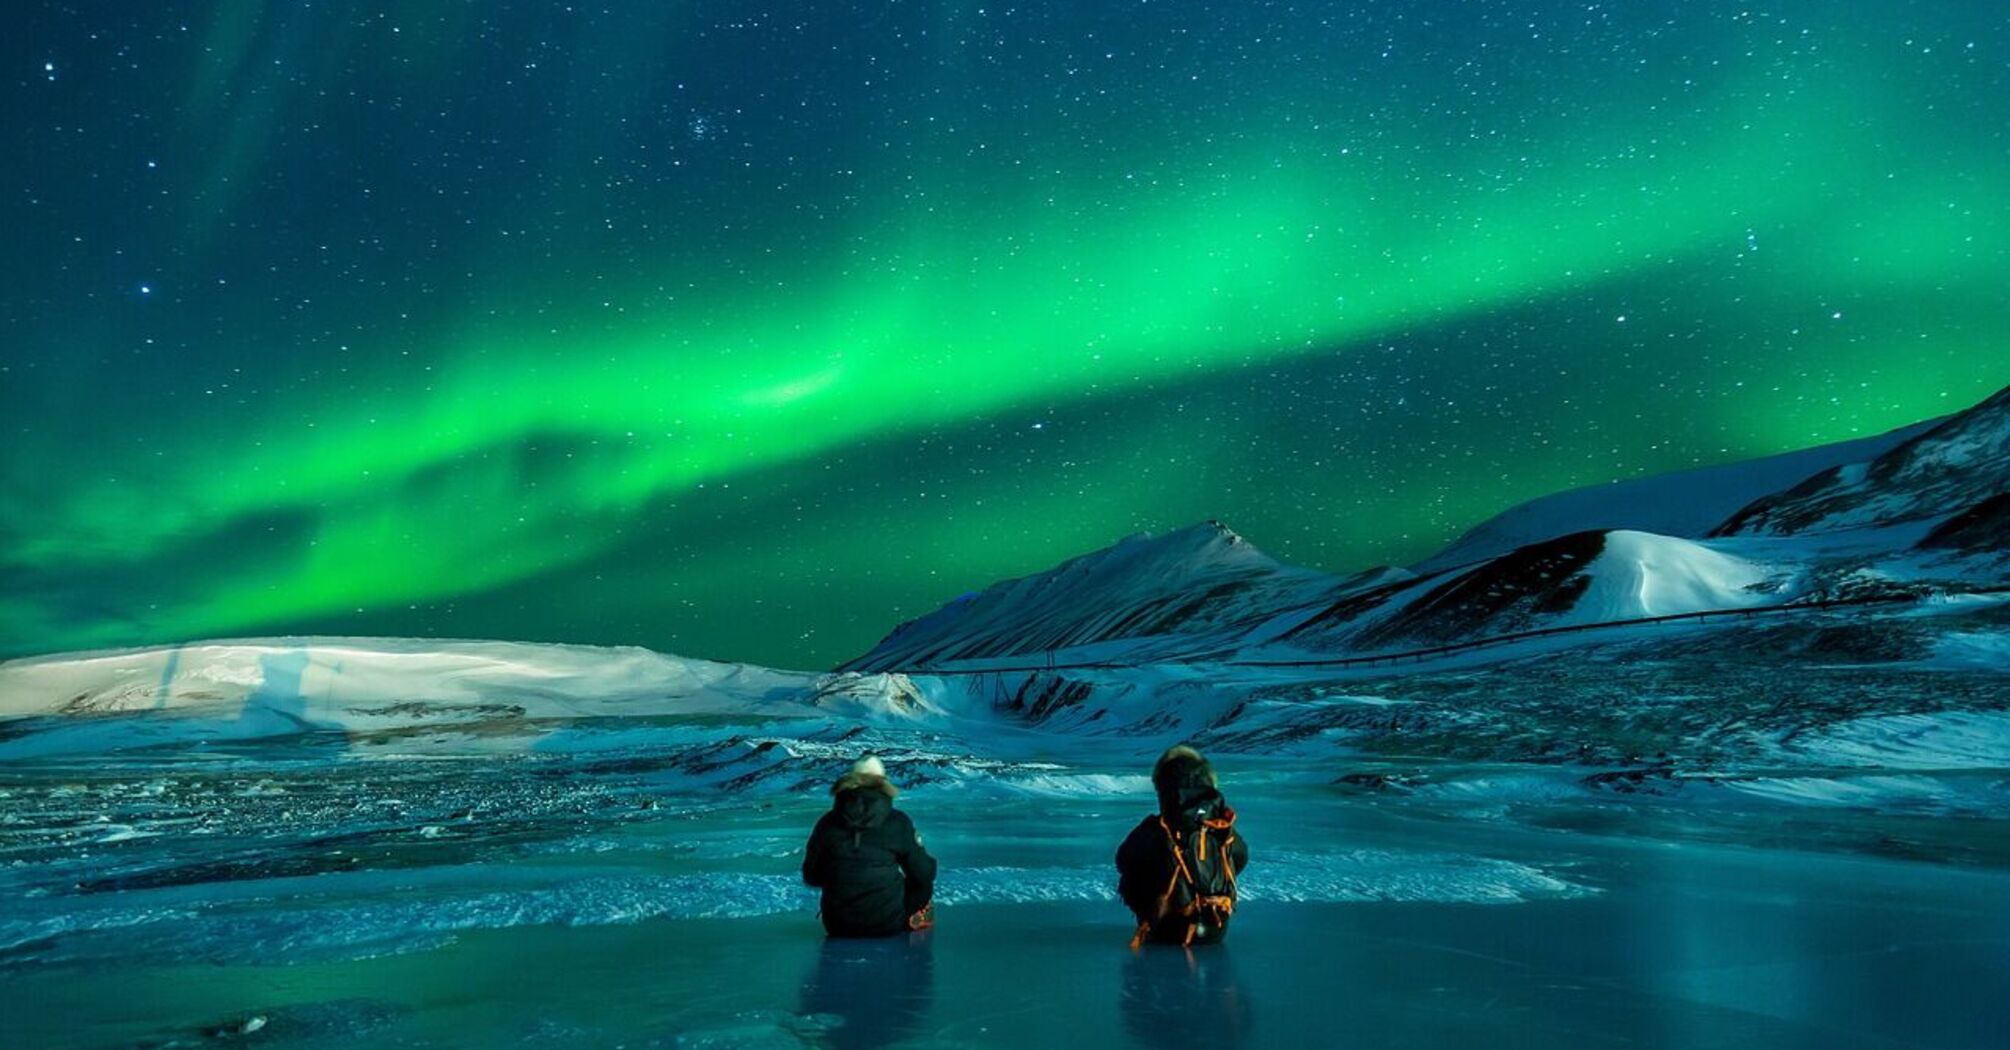 Expedia data: The most popular destinations for seeing the Northern Lights this year